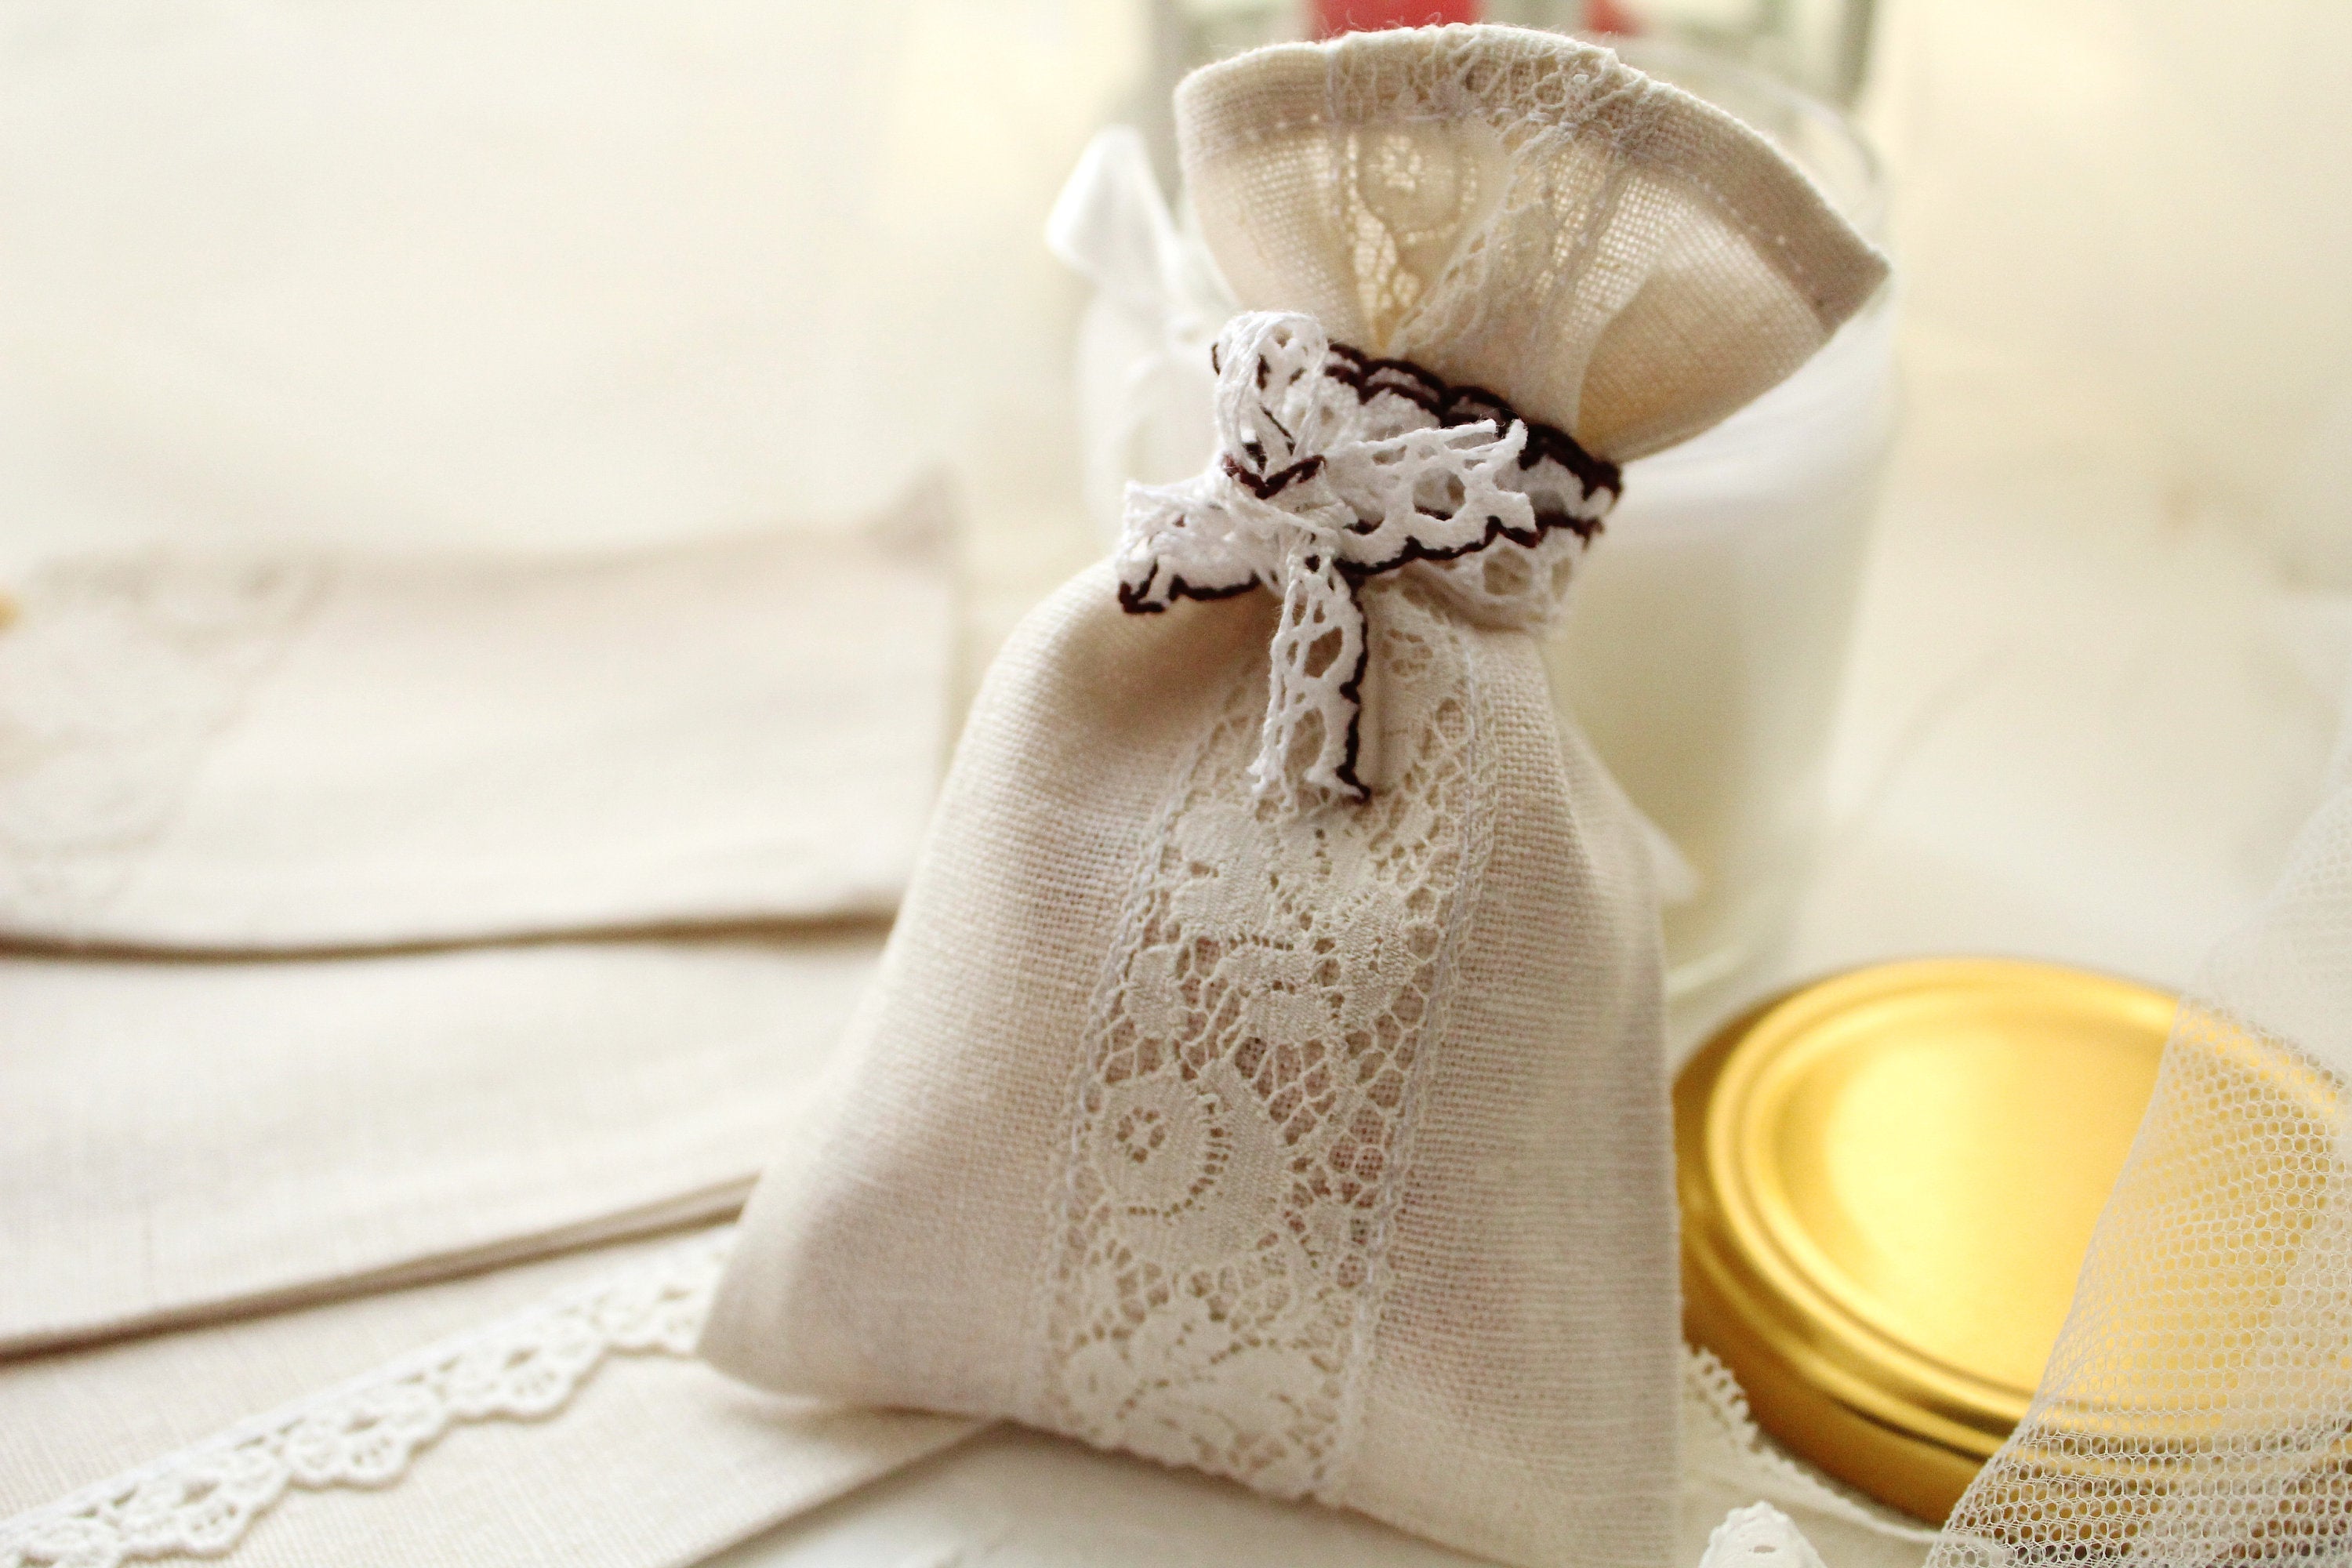 Wedding Favor Bags for Bridal Shower, Welcome Candy, Party Gifts, Natural Linen with Lace, Hand made, Beach Wedding Favors, Snack Bag